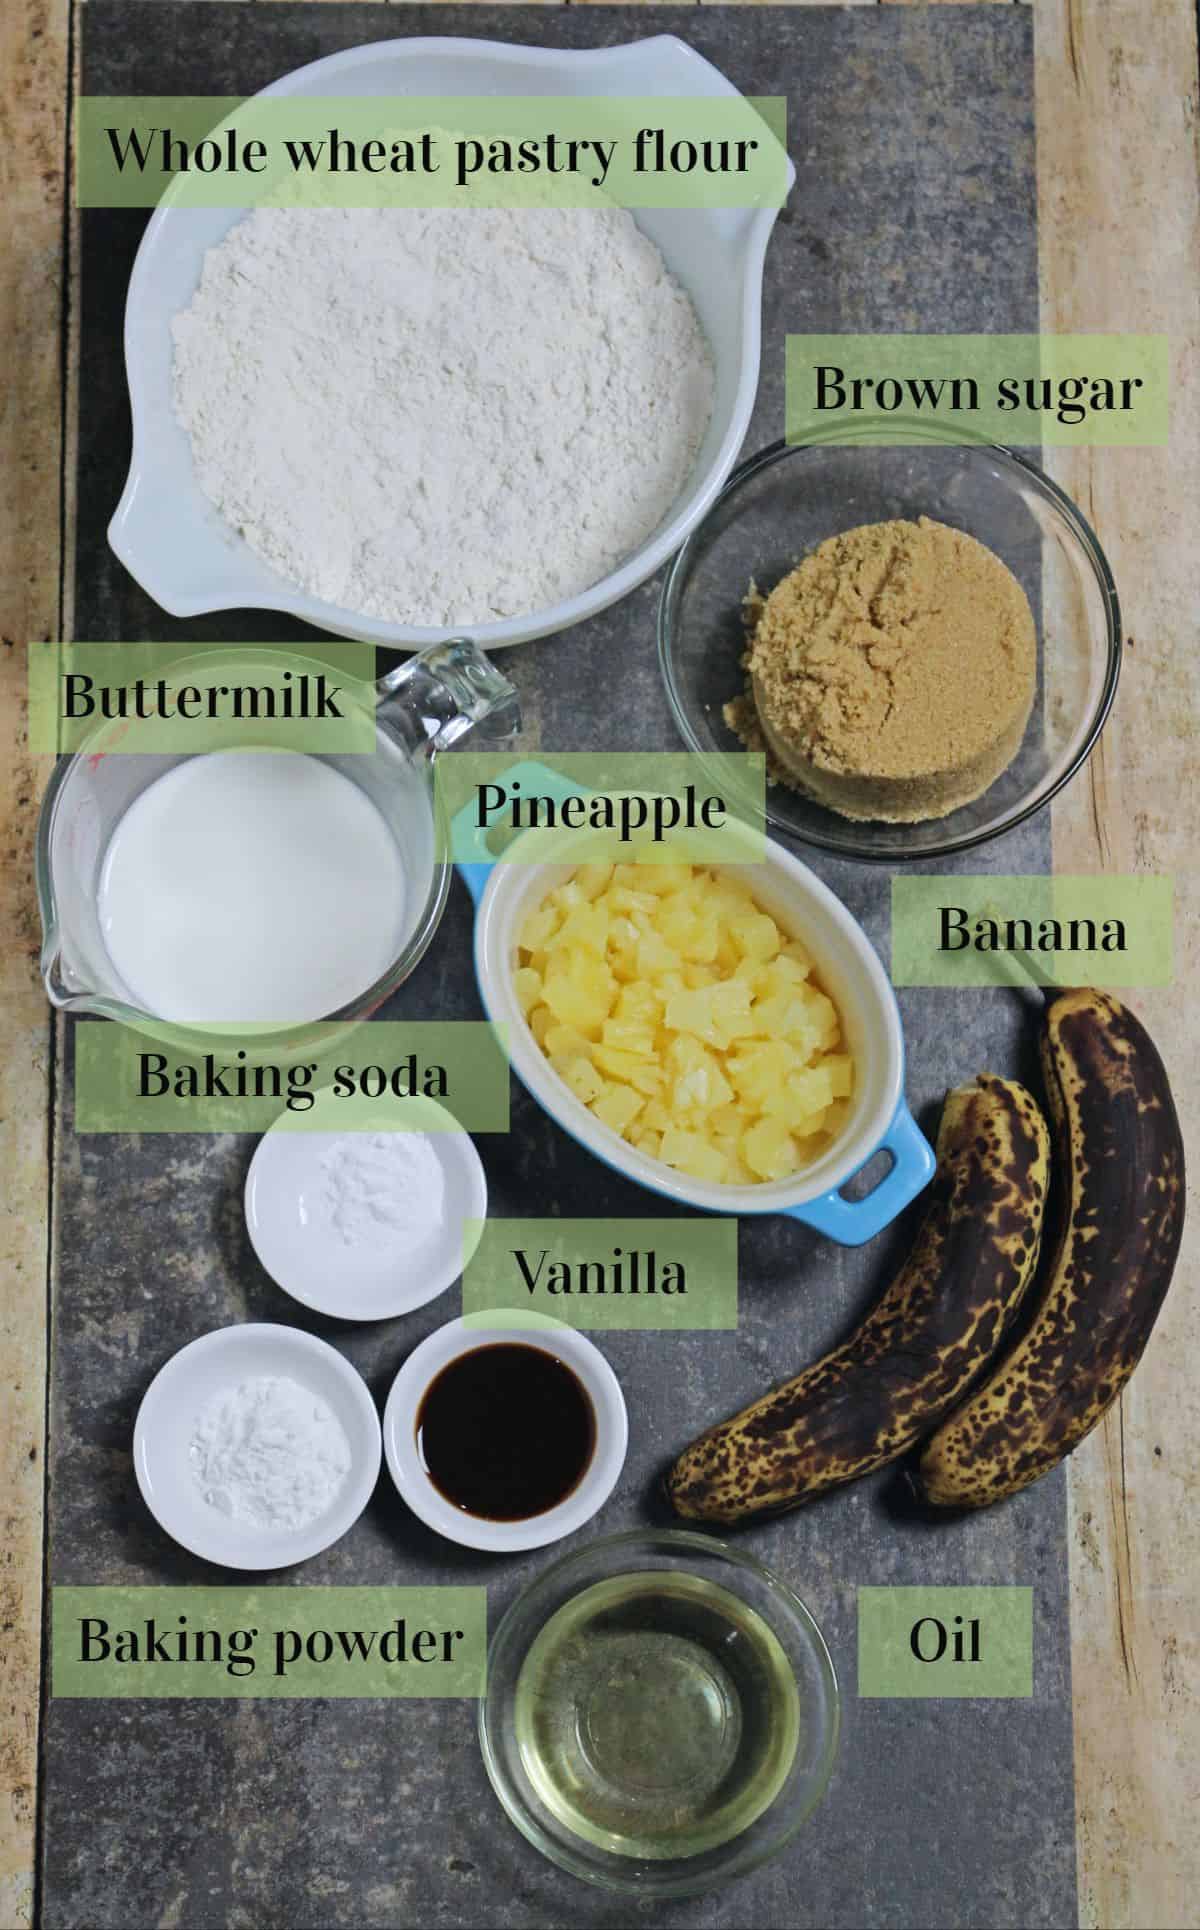 Ingredients needed to make banana pineapple muffins